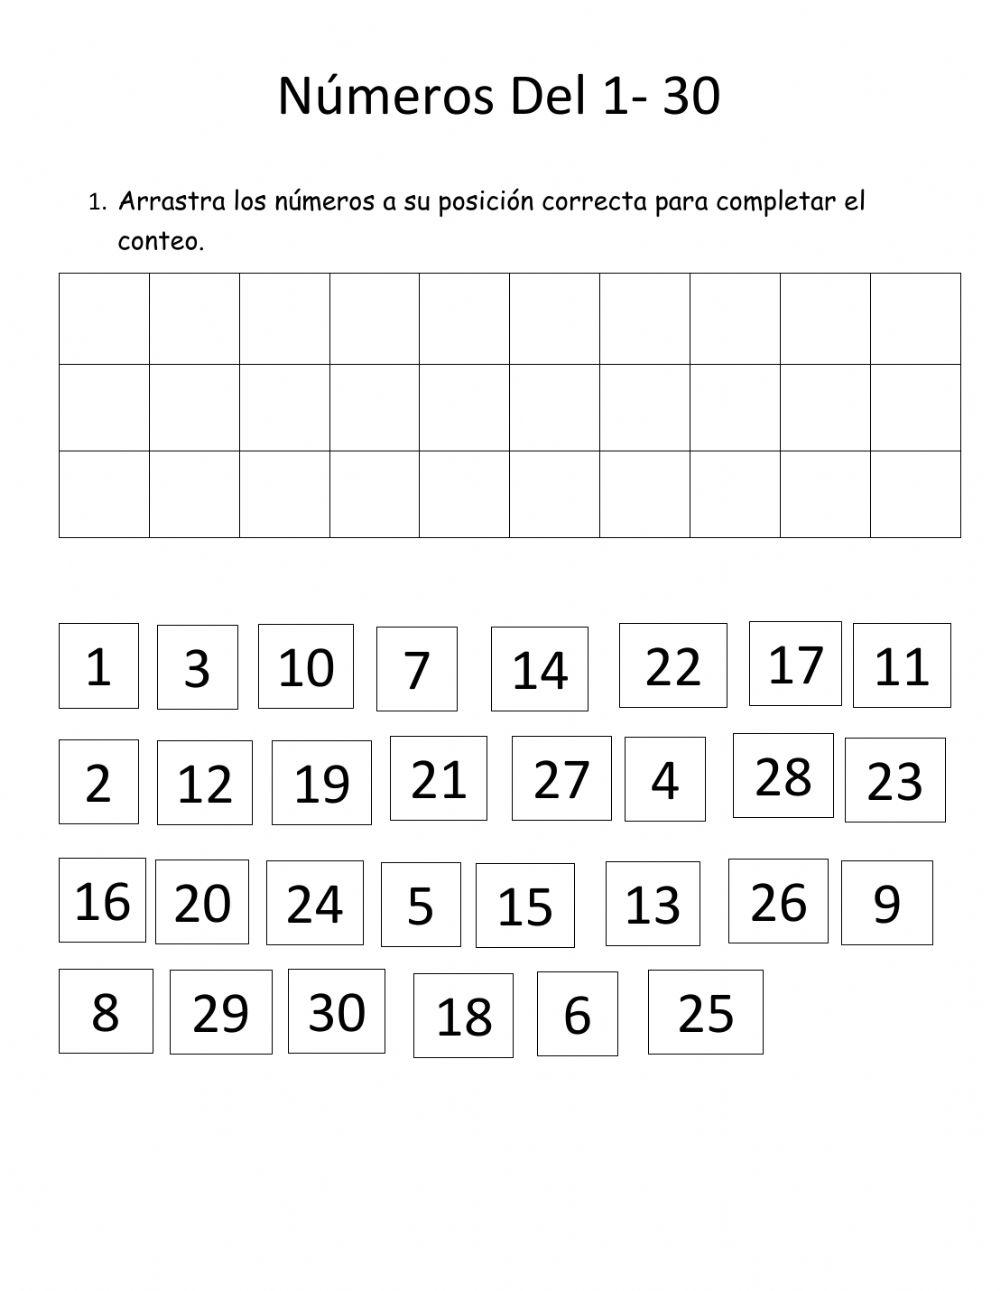 Drag and drop numbers from 1-30